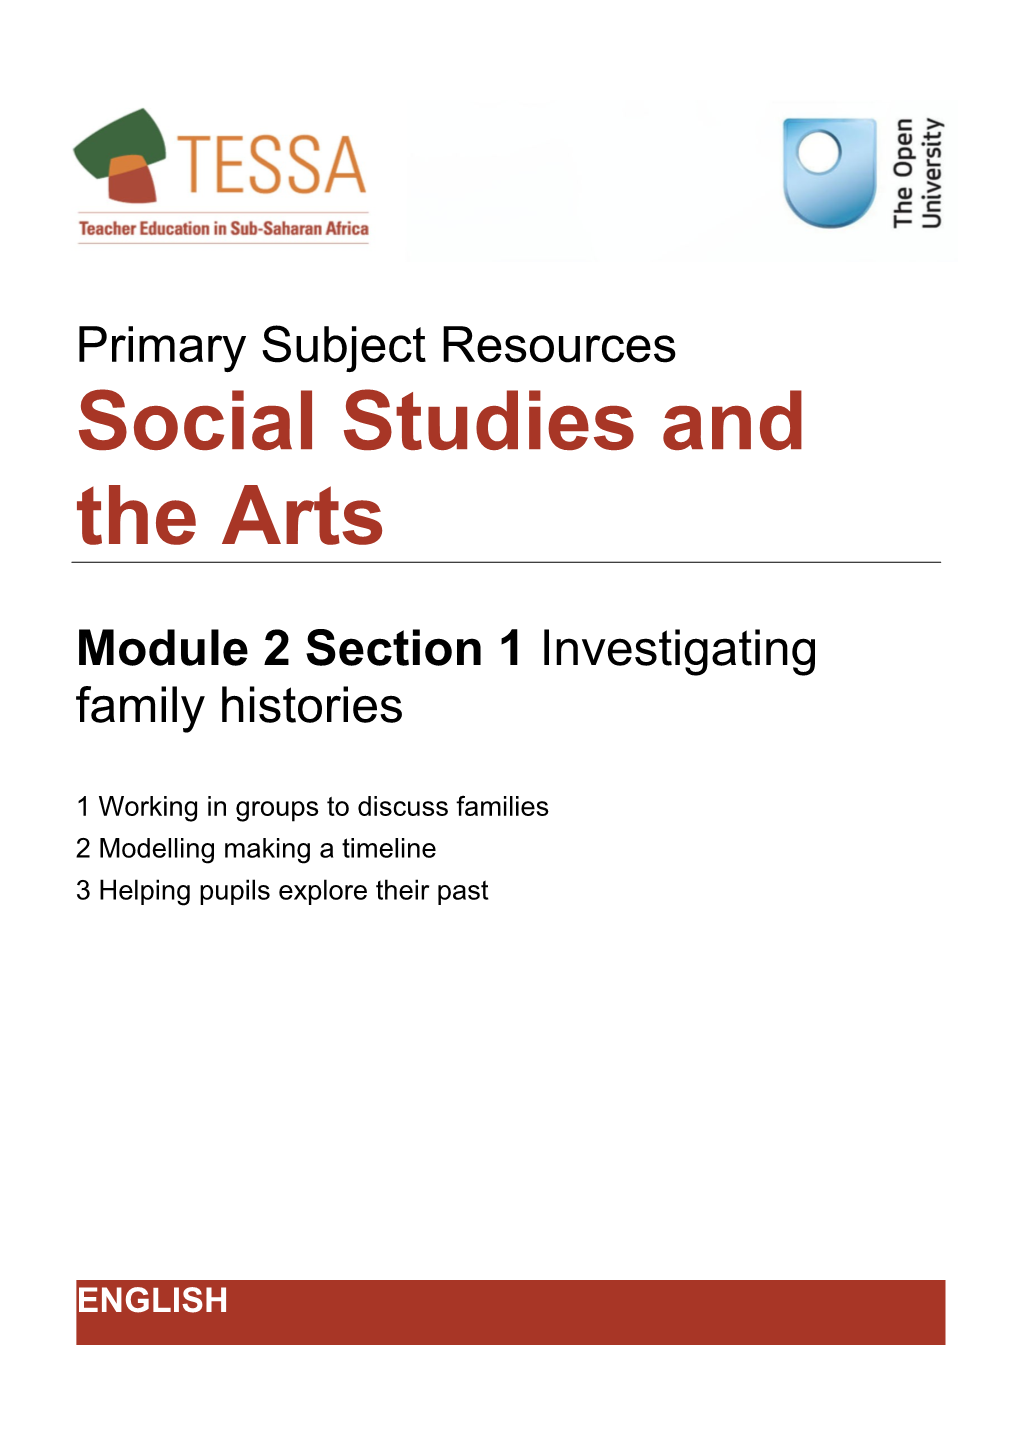 Section 1 : Investigating Family Histories